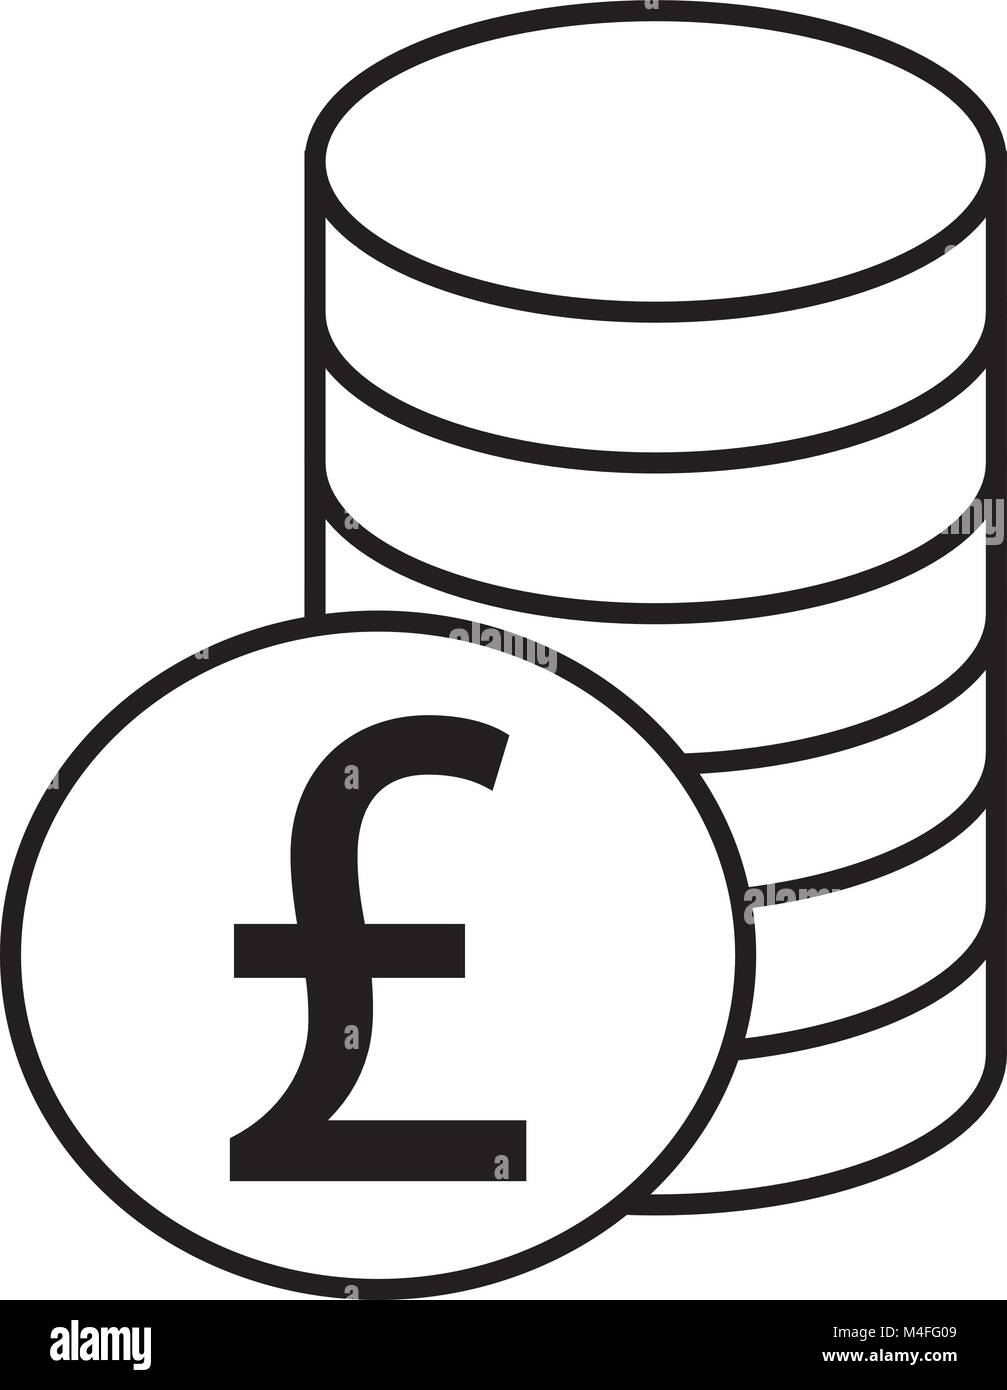 Pound Sterling currency icon or logo vector over a pile of coins stack. Symbol for United Kingdom or Great Britain and England bank, banking or Britis Stock Vector